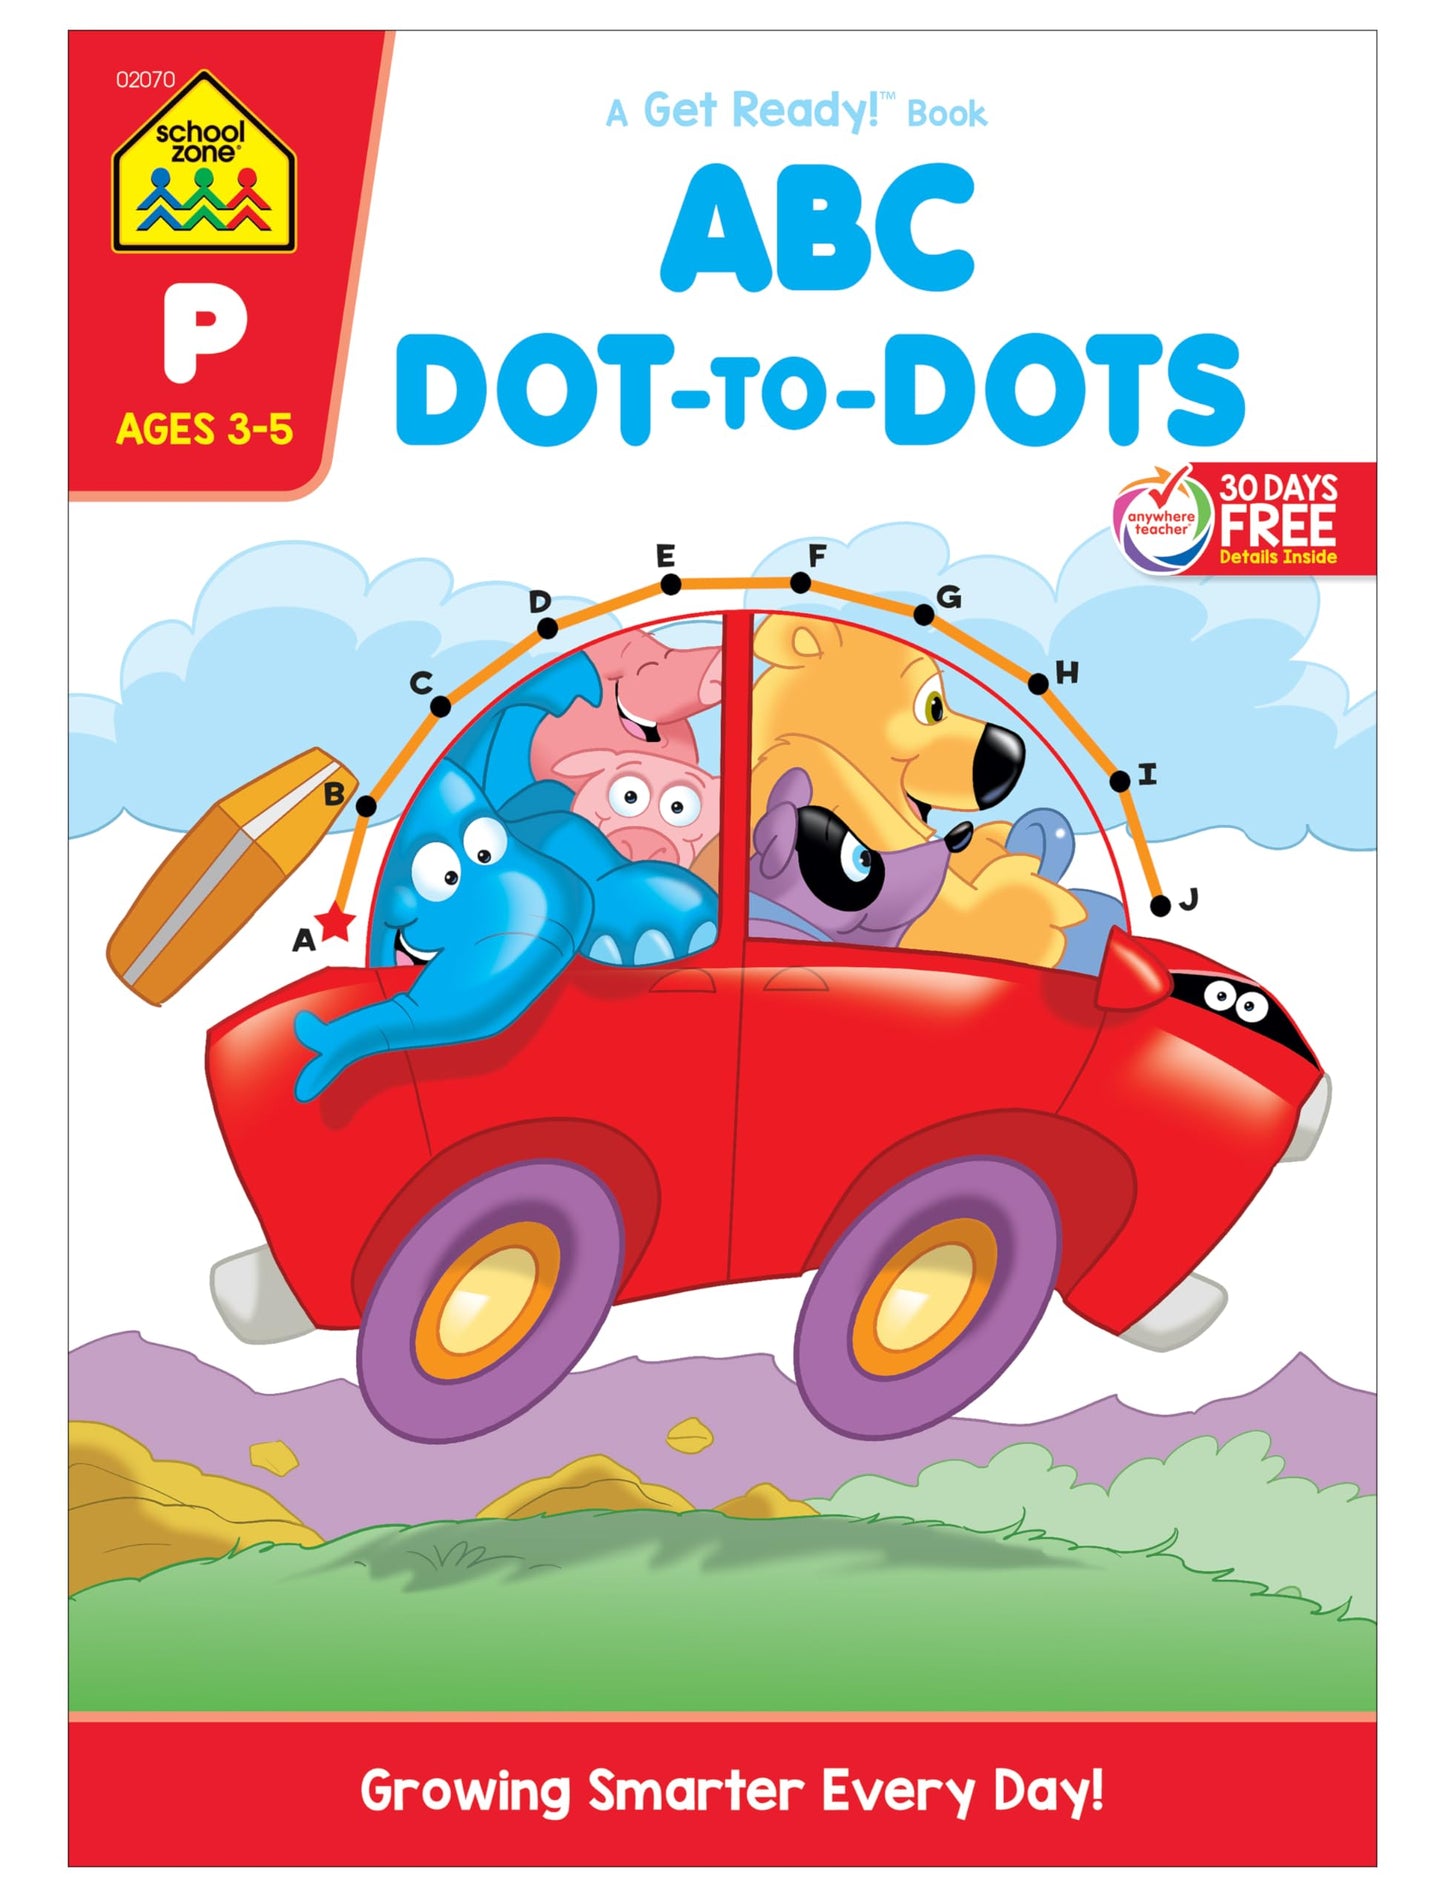 School Zone ABC Dot-to-Dots Workbook: Preschool, Kindergarten, Connect the Dots, Alphabet, Letter Puzzles, Creative, and More (A Get Ready!™ Activity Book Series)